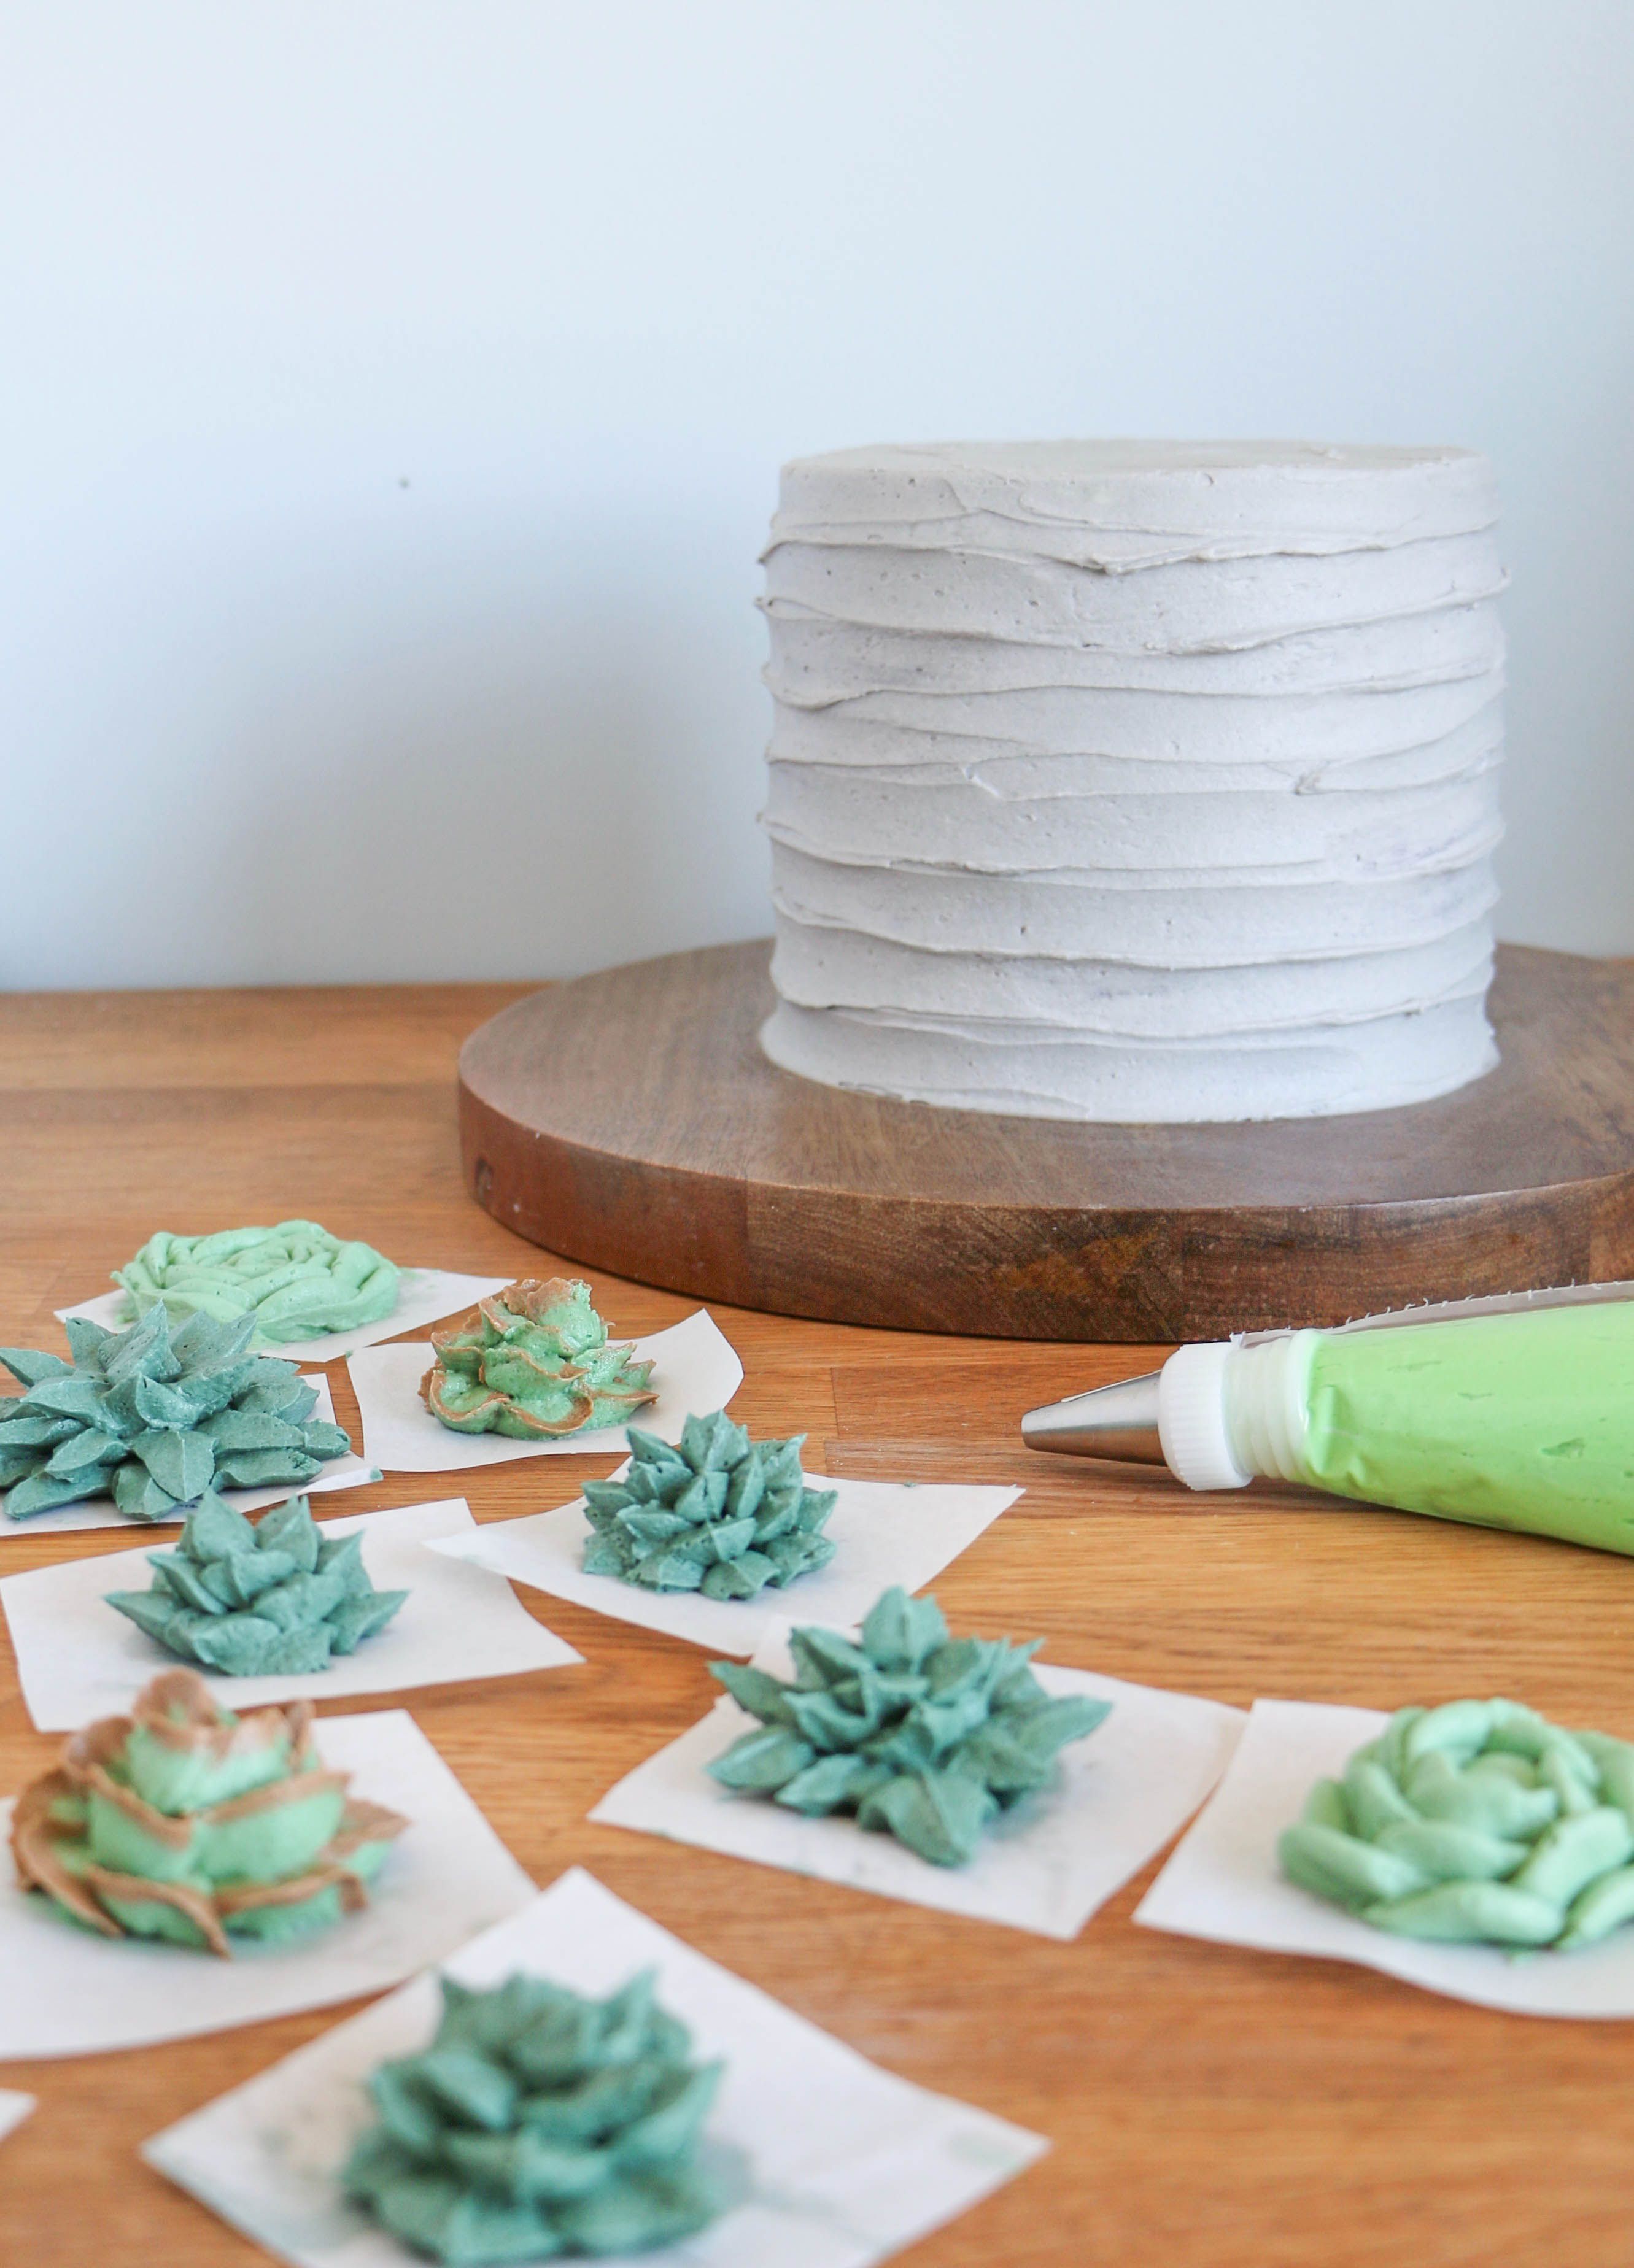 Succulent Cake Buttercream Piping Tutorial -   21 cake decor step by step
 ideas